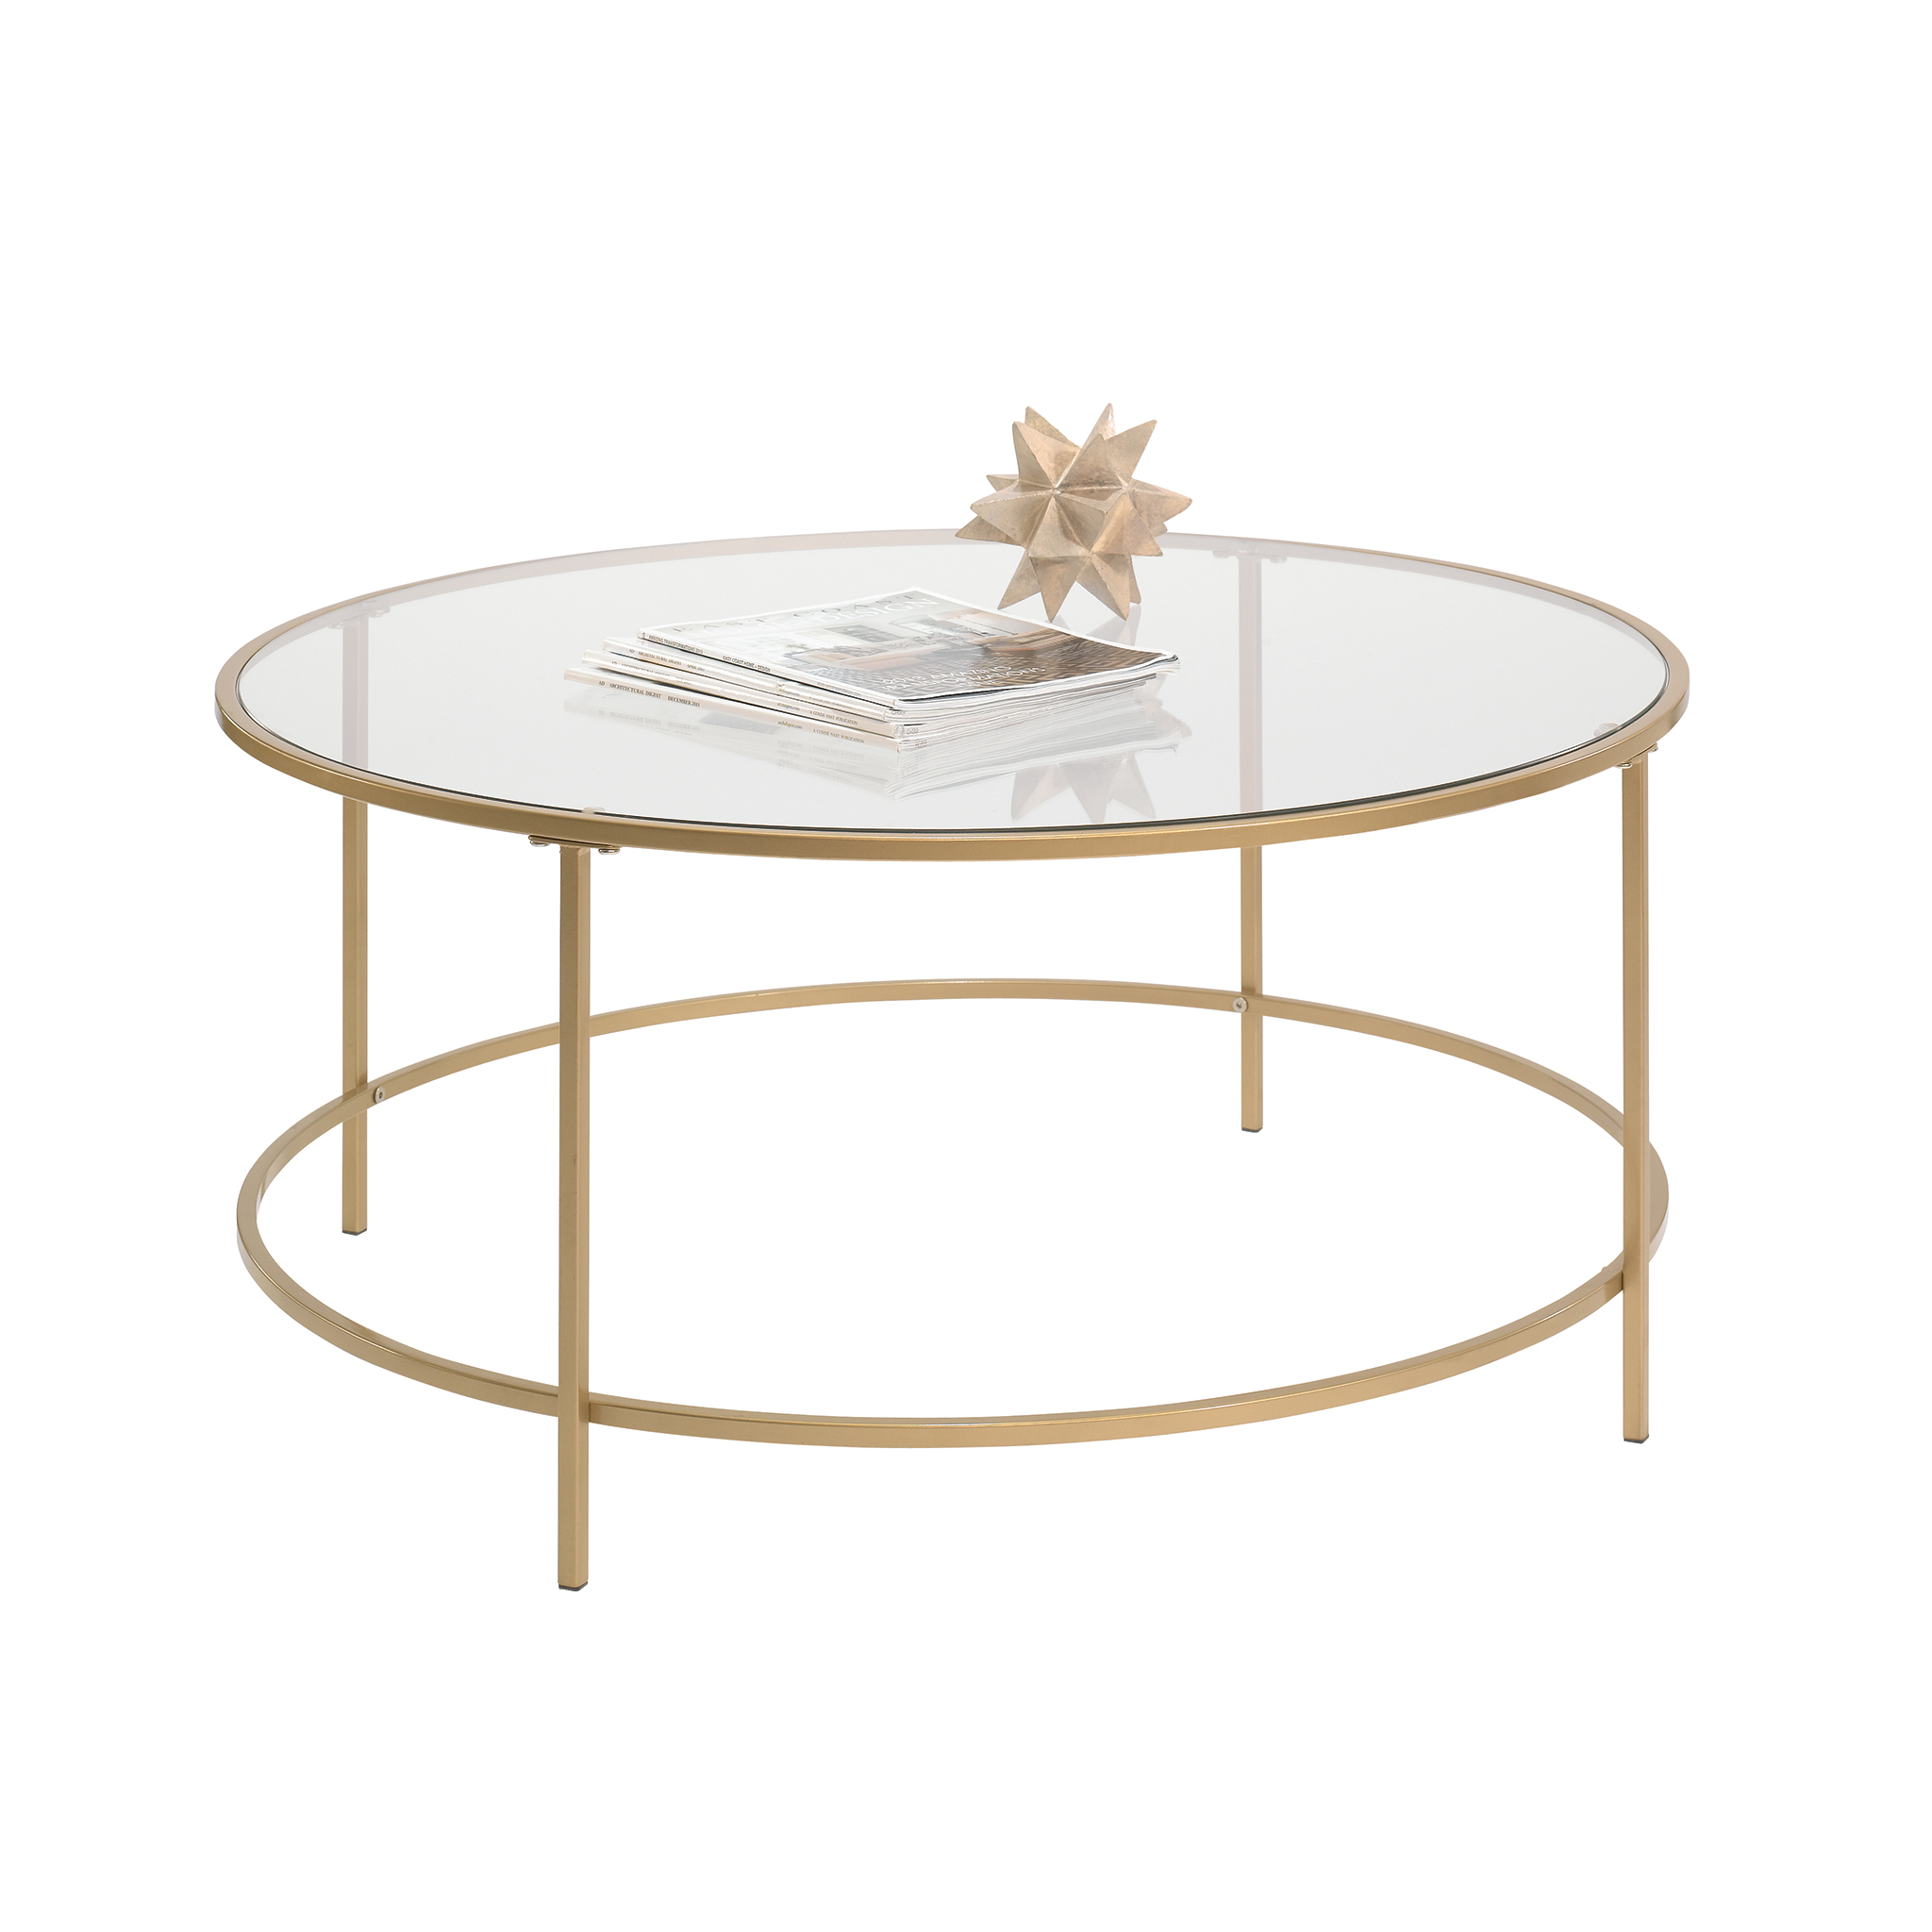 Better Homes & Gardens Nola Coffee Table, Gold Finish - image 2 of 10